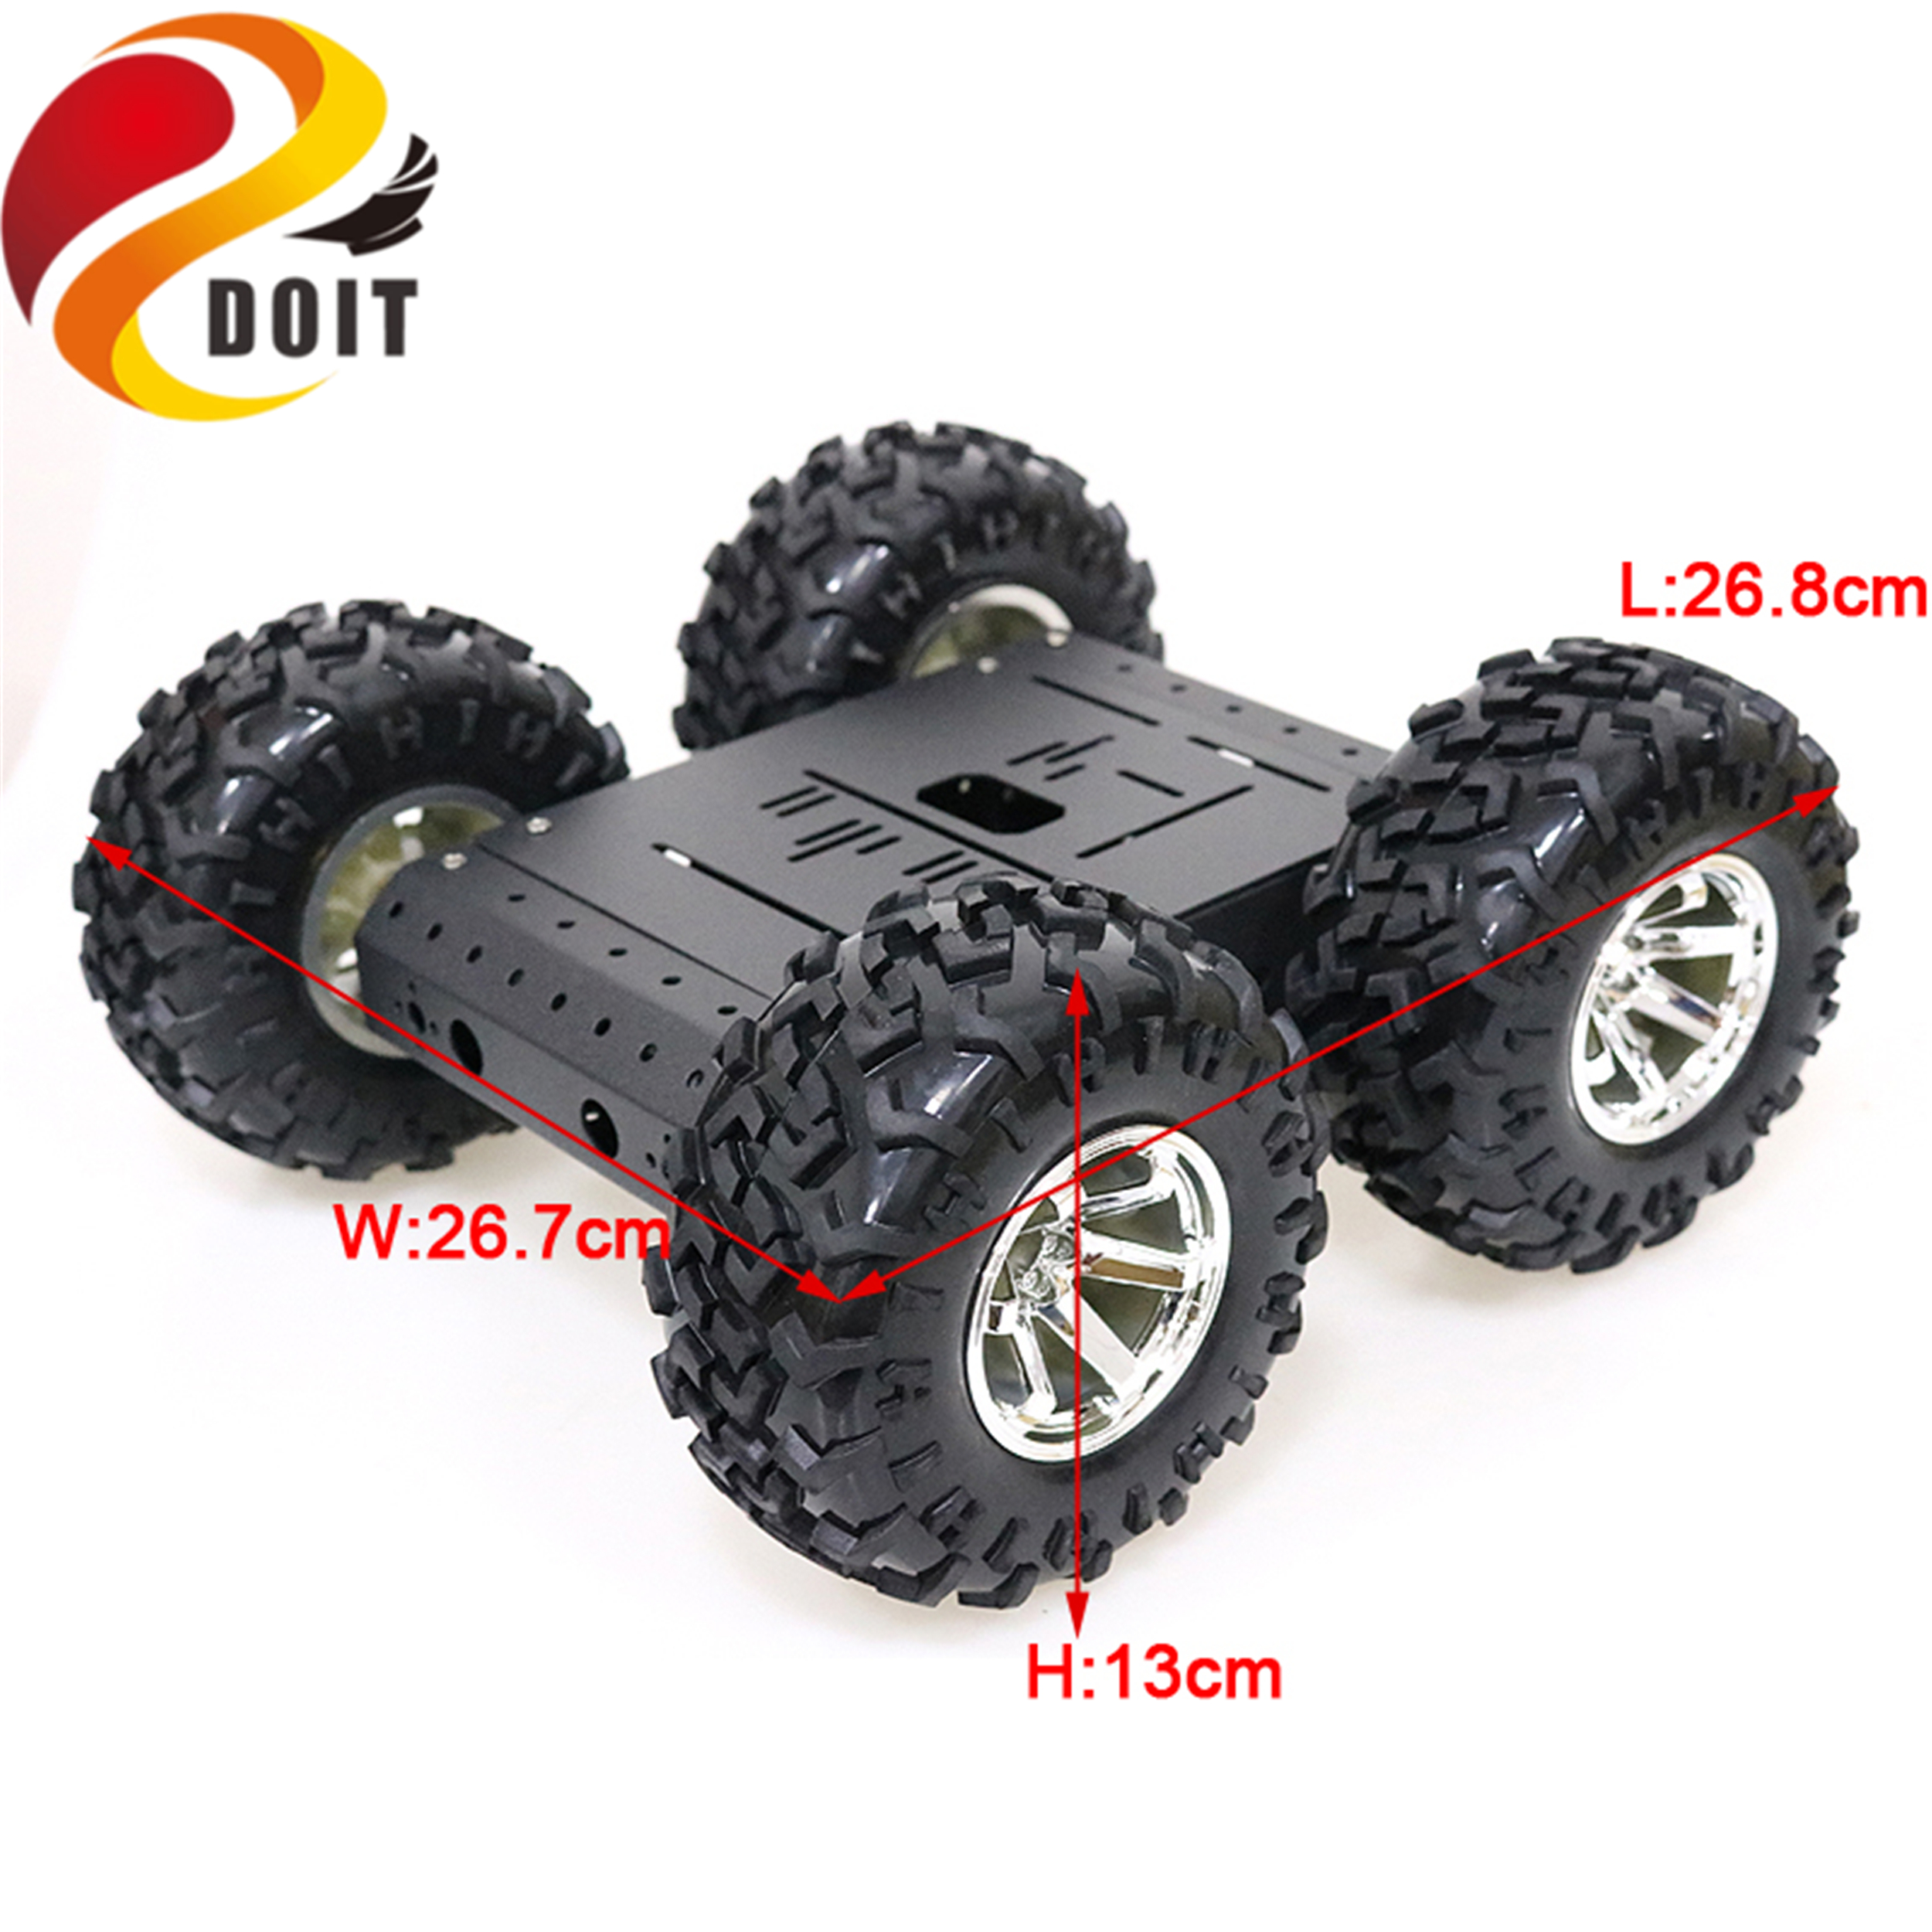 SZDOIT 4WD Metal Smart Robot Car Chassis Kit 130mm Rubber Wheel High Torque DC Motor Heavy Load DIY For Arduino Education DIY